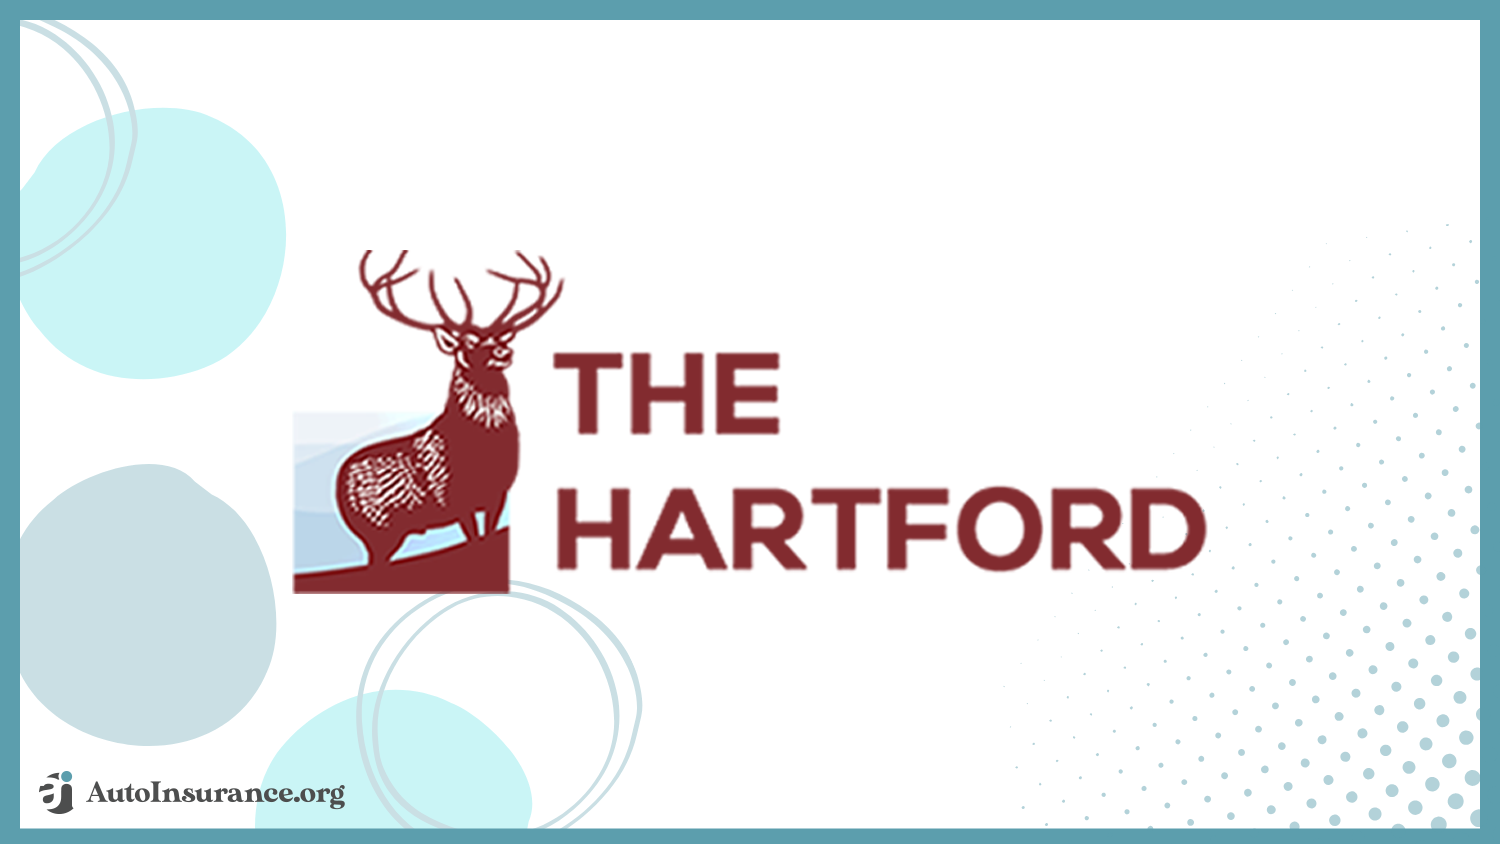 The Hartford: Best Auto Insurance for Luxury Cars